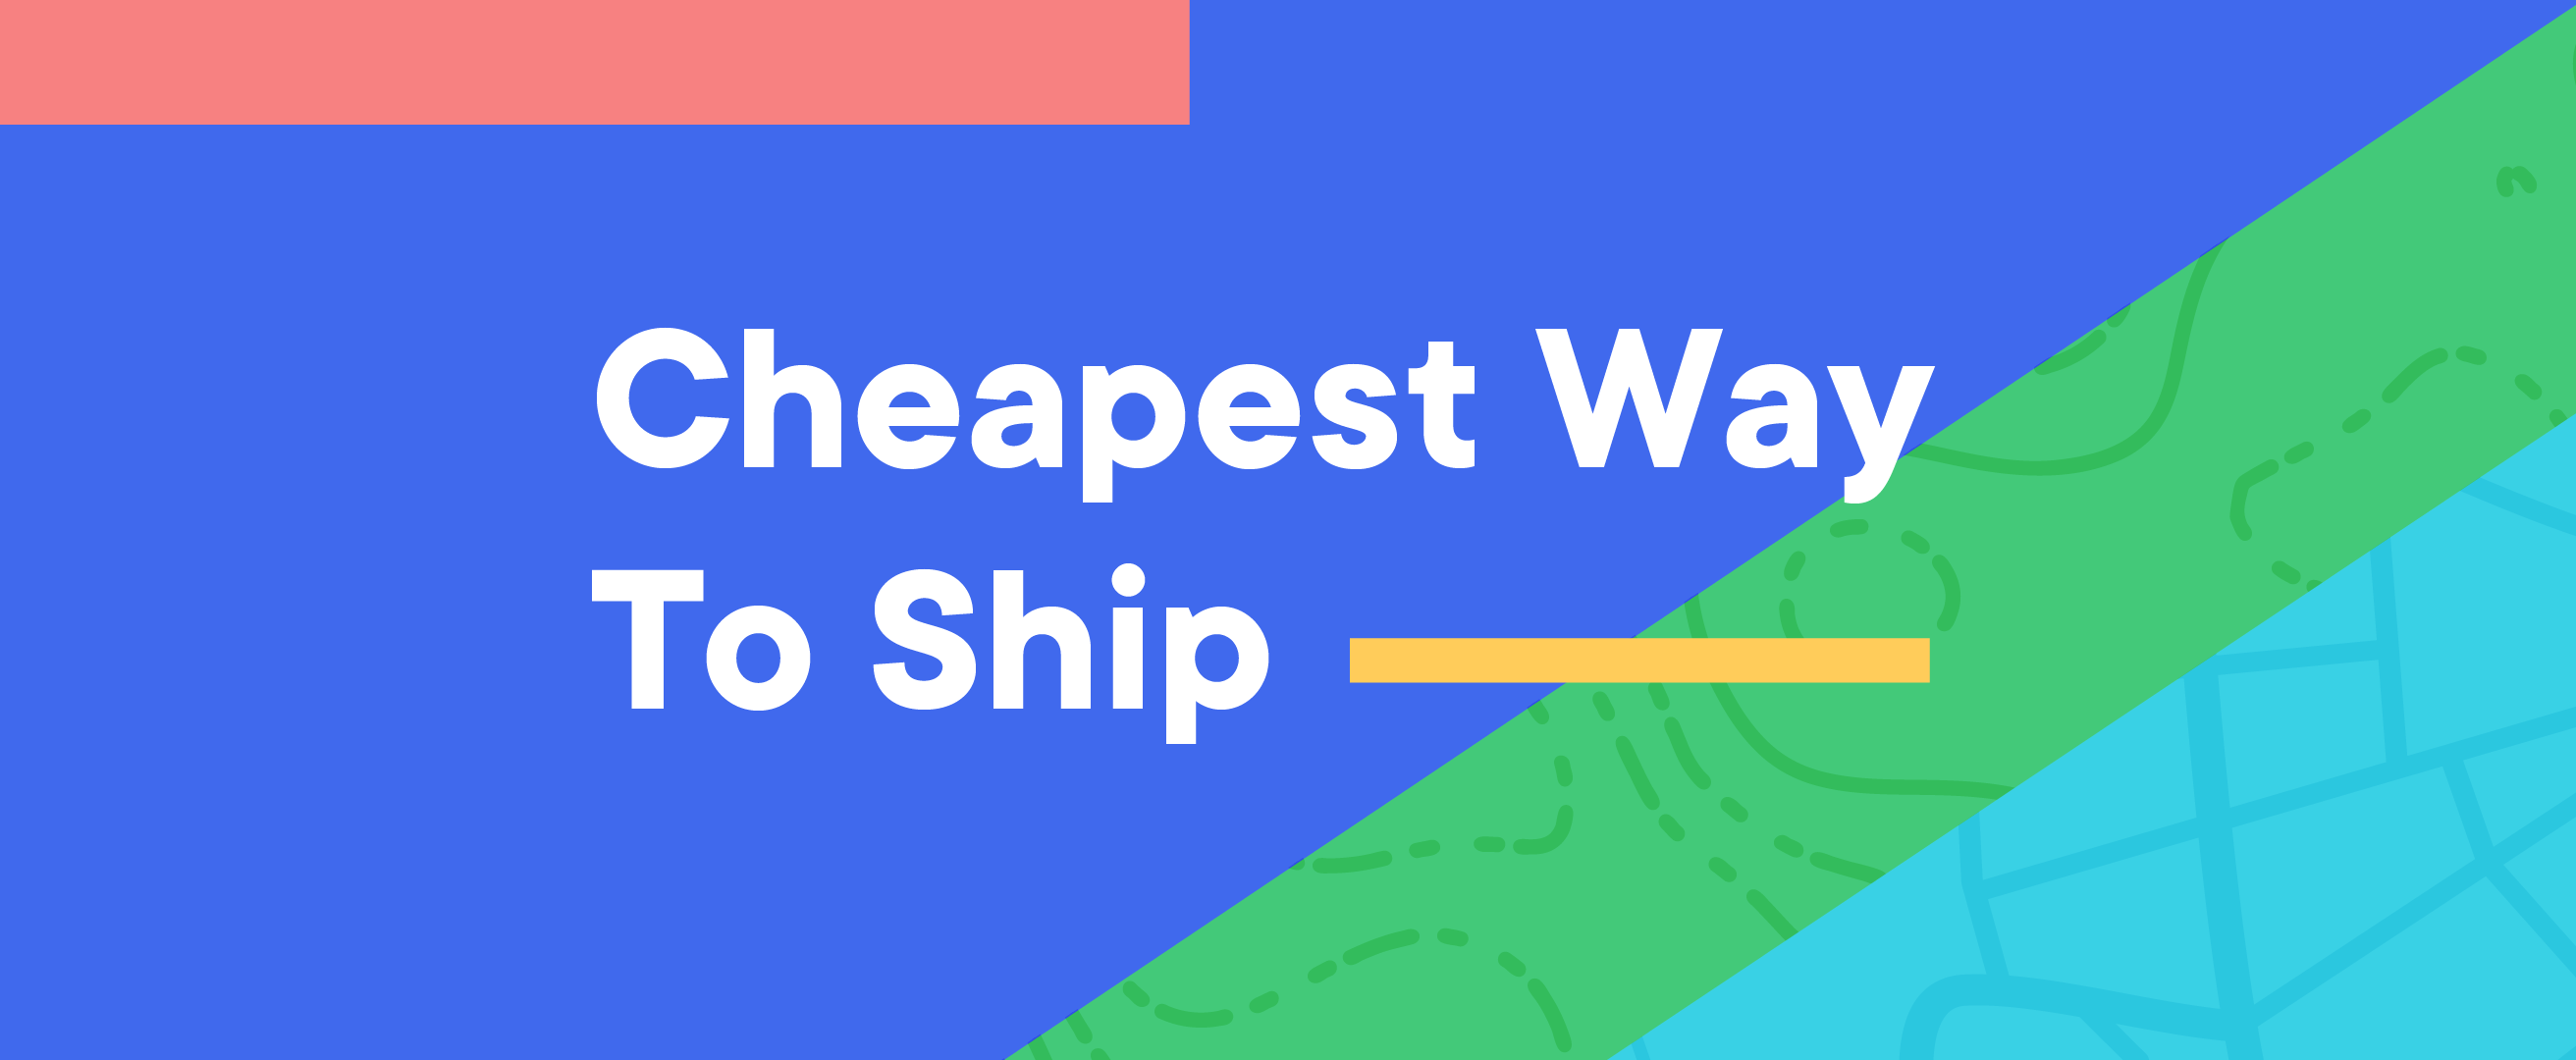 Cheapest Way to Ship logo on a blue and green background